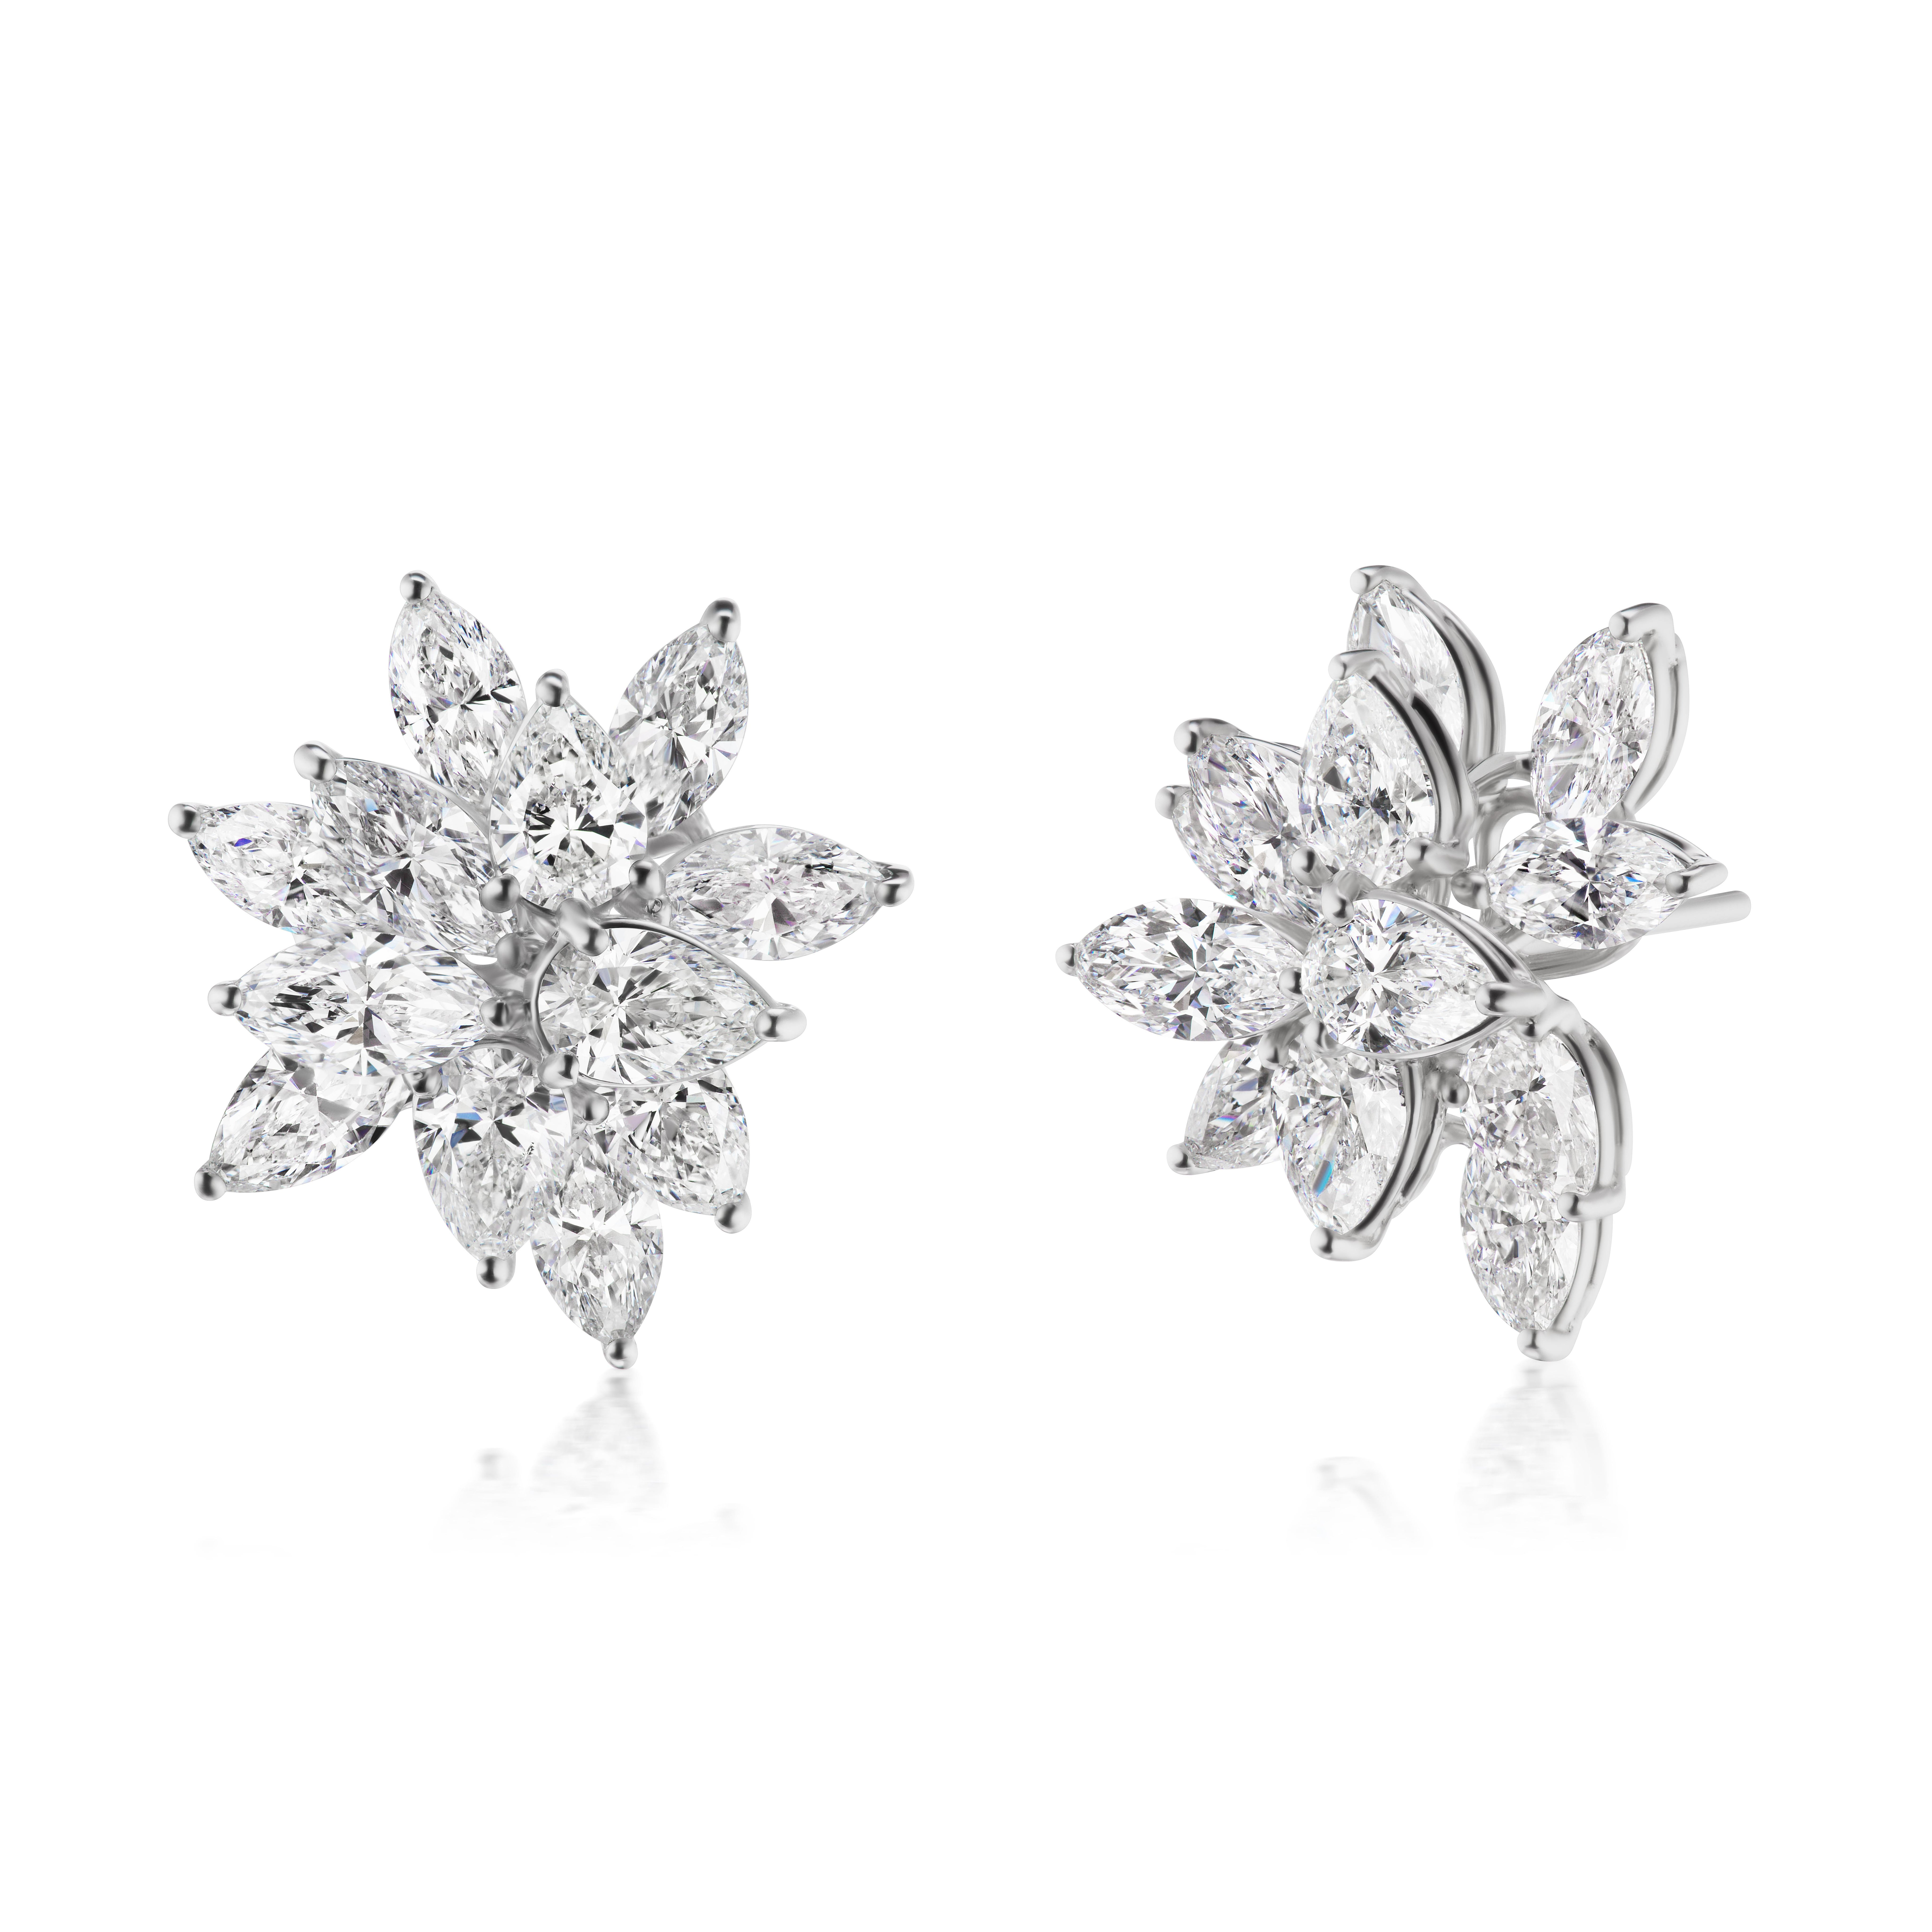 Crafted in 18K white gold and set with 8.41 carats total weight of pear and marquise-shaped diamonds, this gorgeous cluster of glistening diamonds create a pair of beautiful stud earrings. These cluster-style earrings are just exquisite will shine